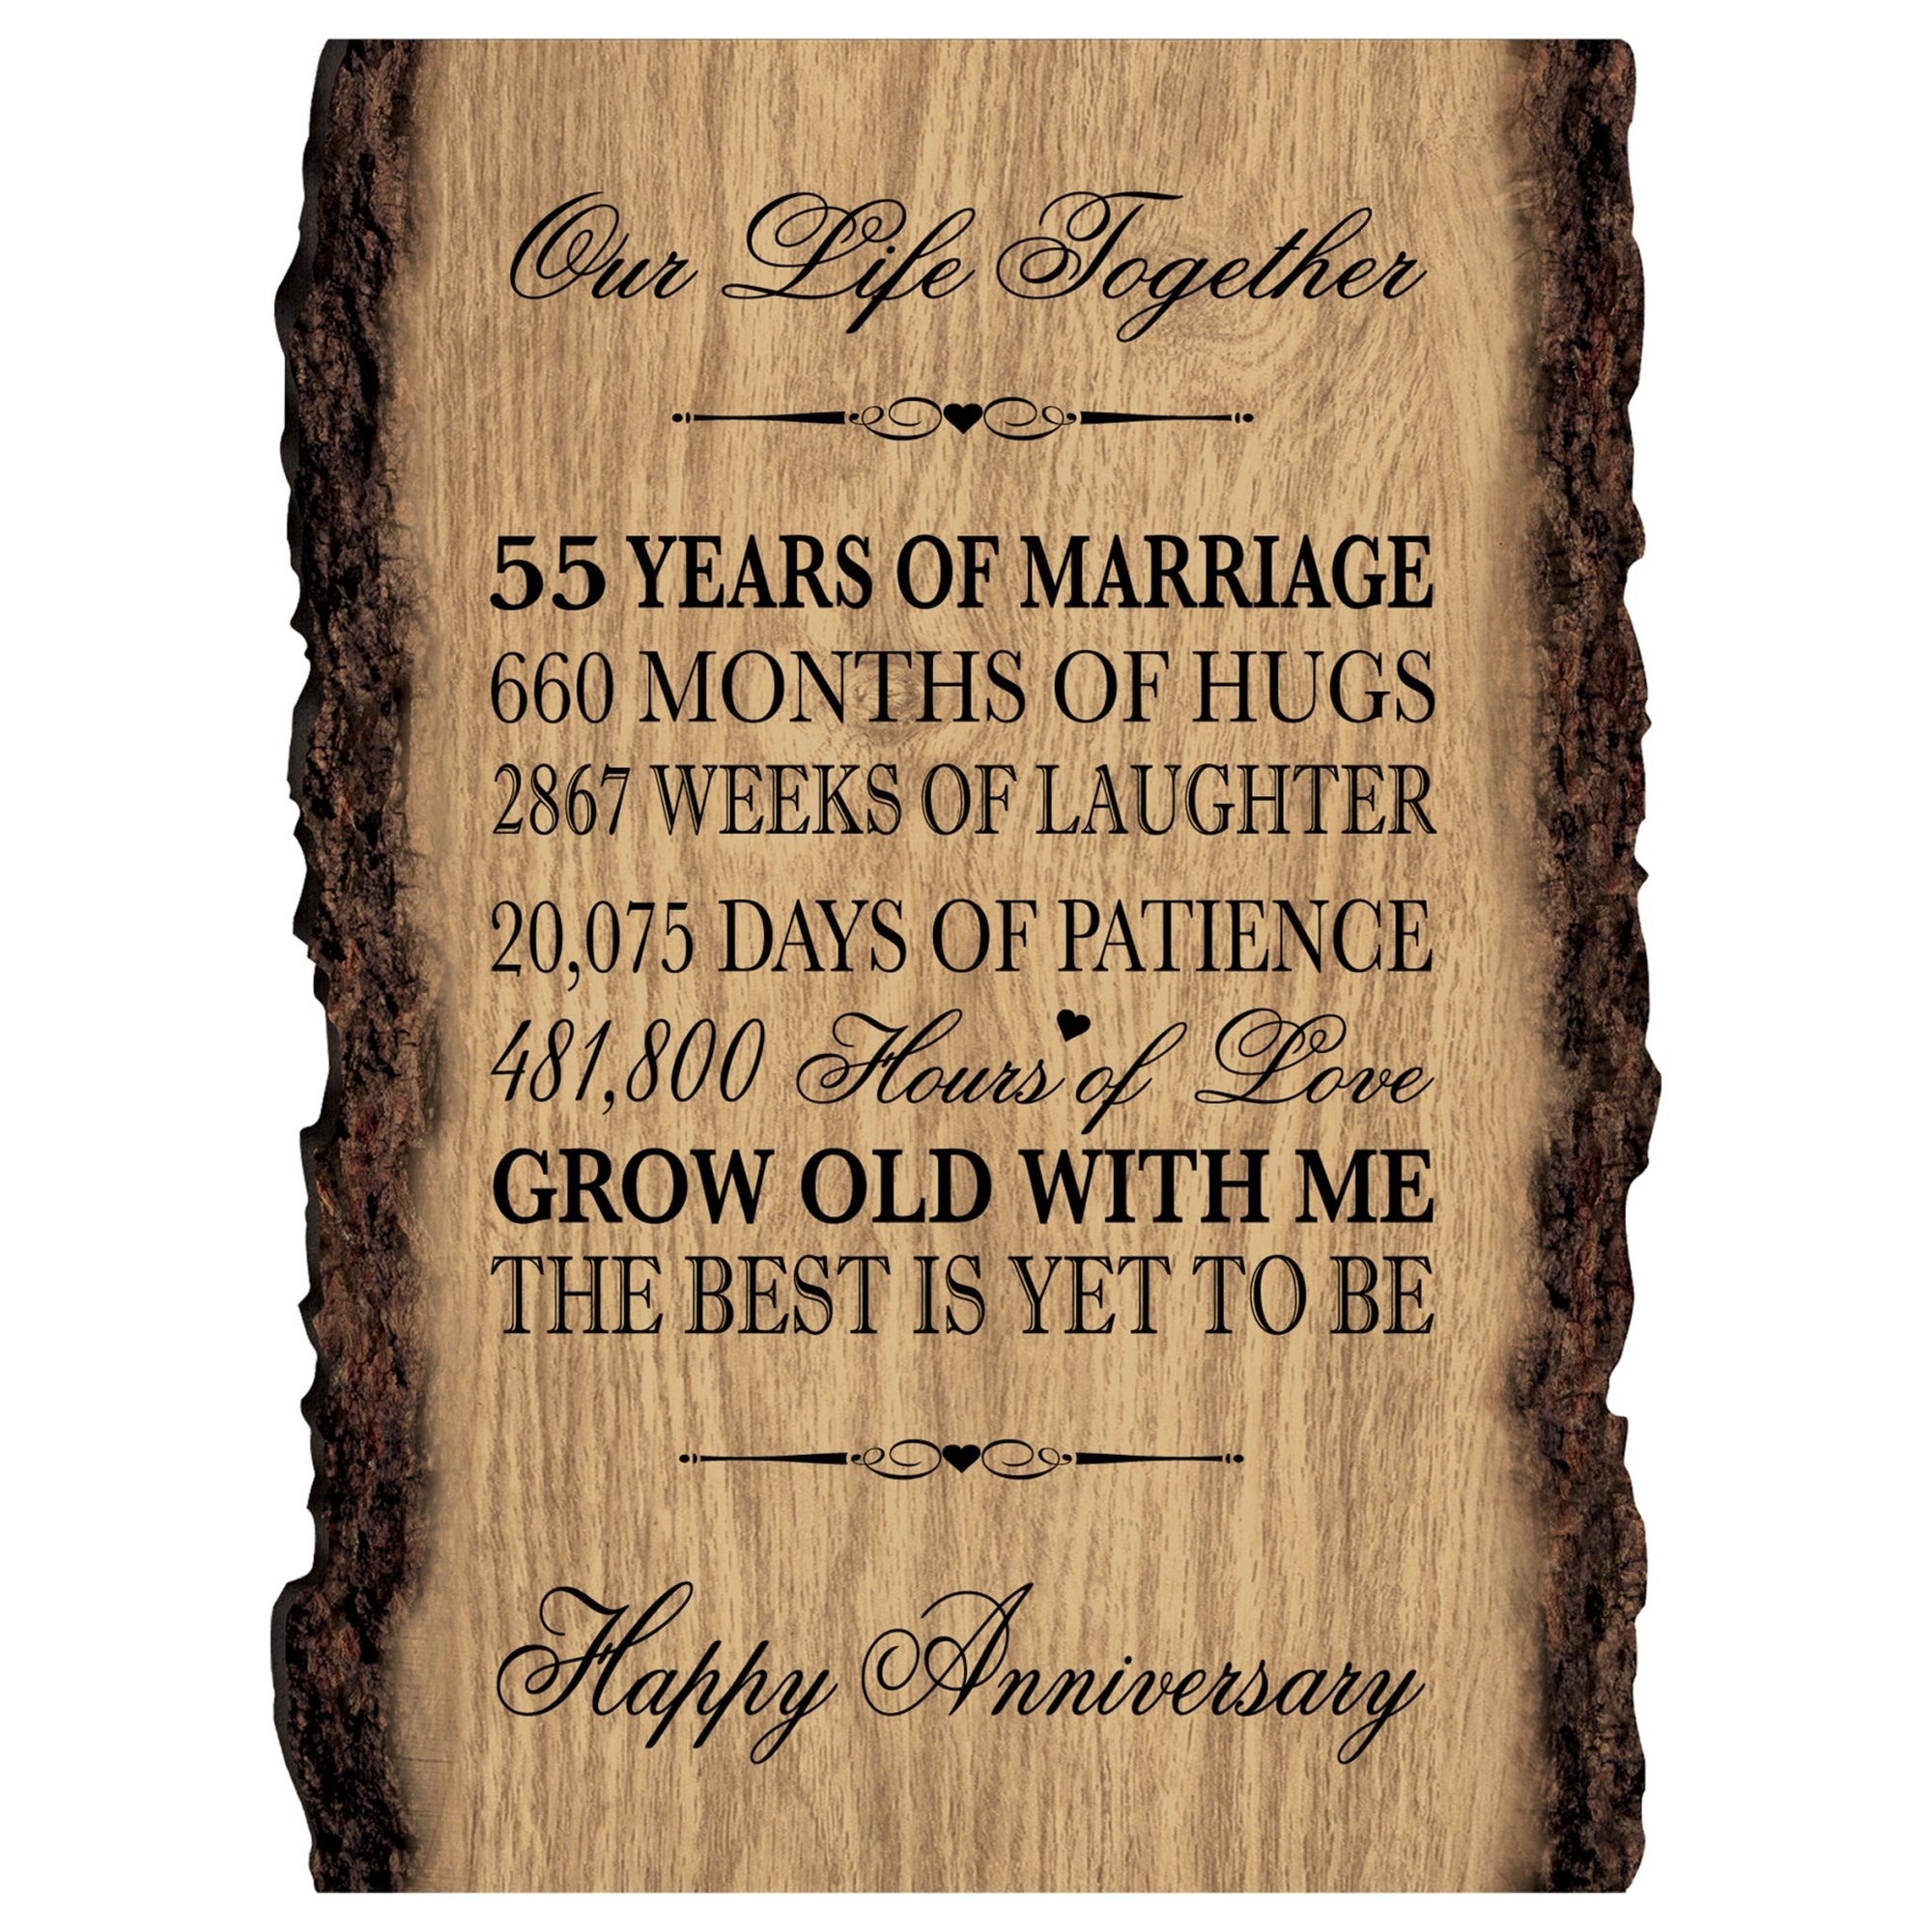 Rustic Wedding Anniversary 9x12 Barky Wall Plaque Gift For Parents, Grandparents New Couple - 55 Years Of Marriage - LifeSong Milestones